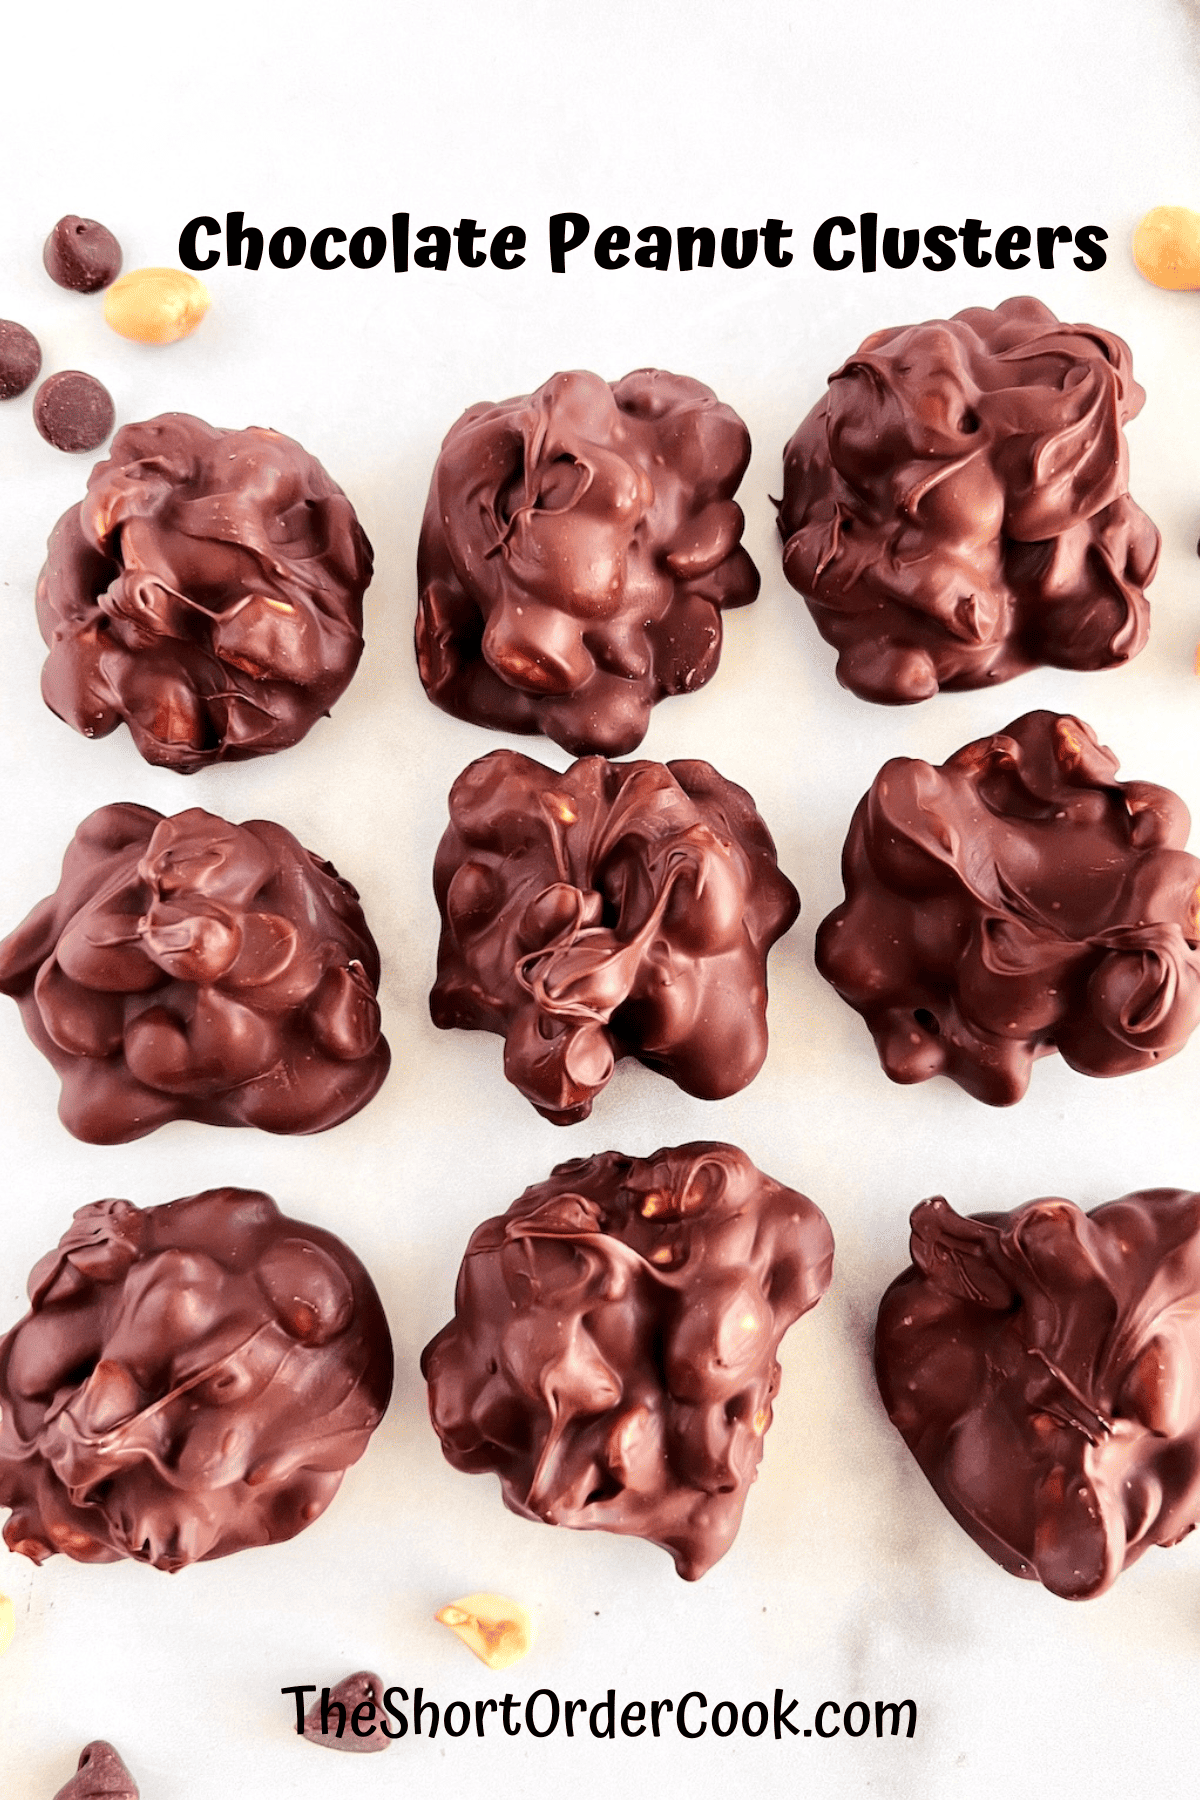 Clusters of chocolate-covered roasted peanuts.